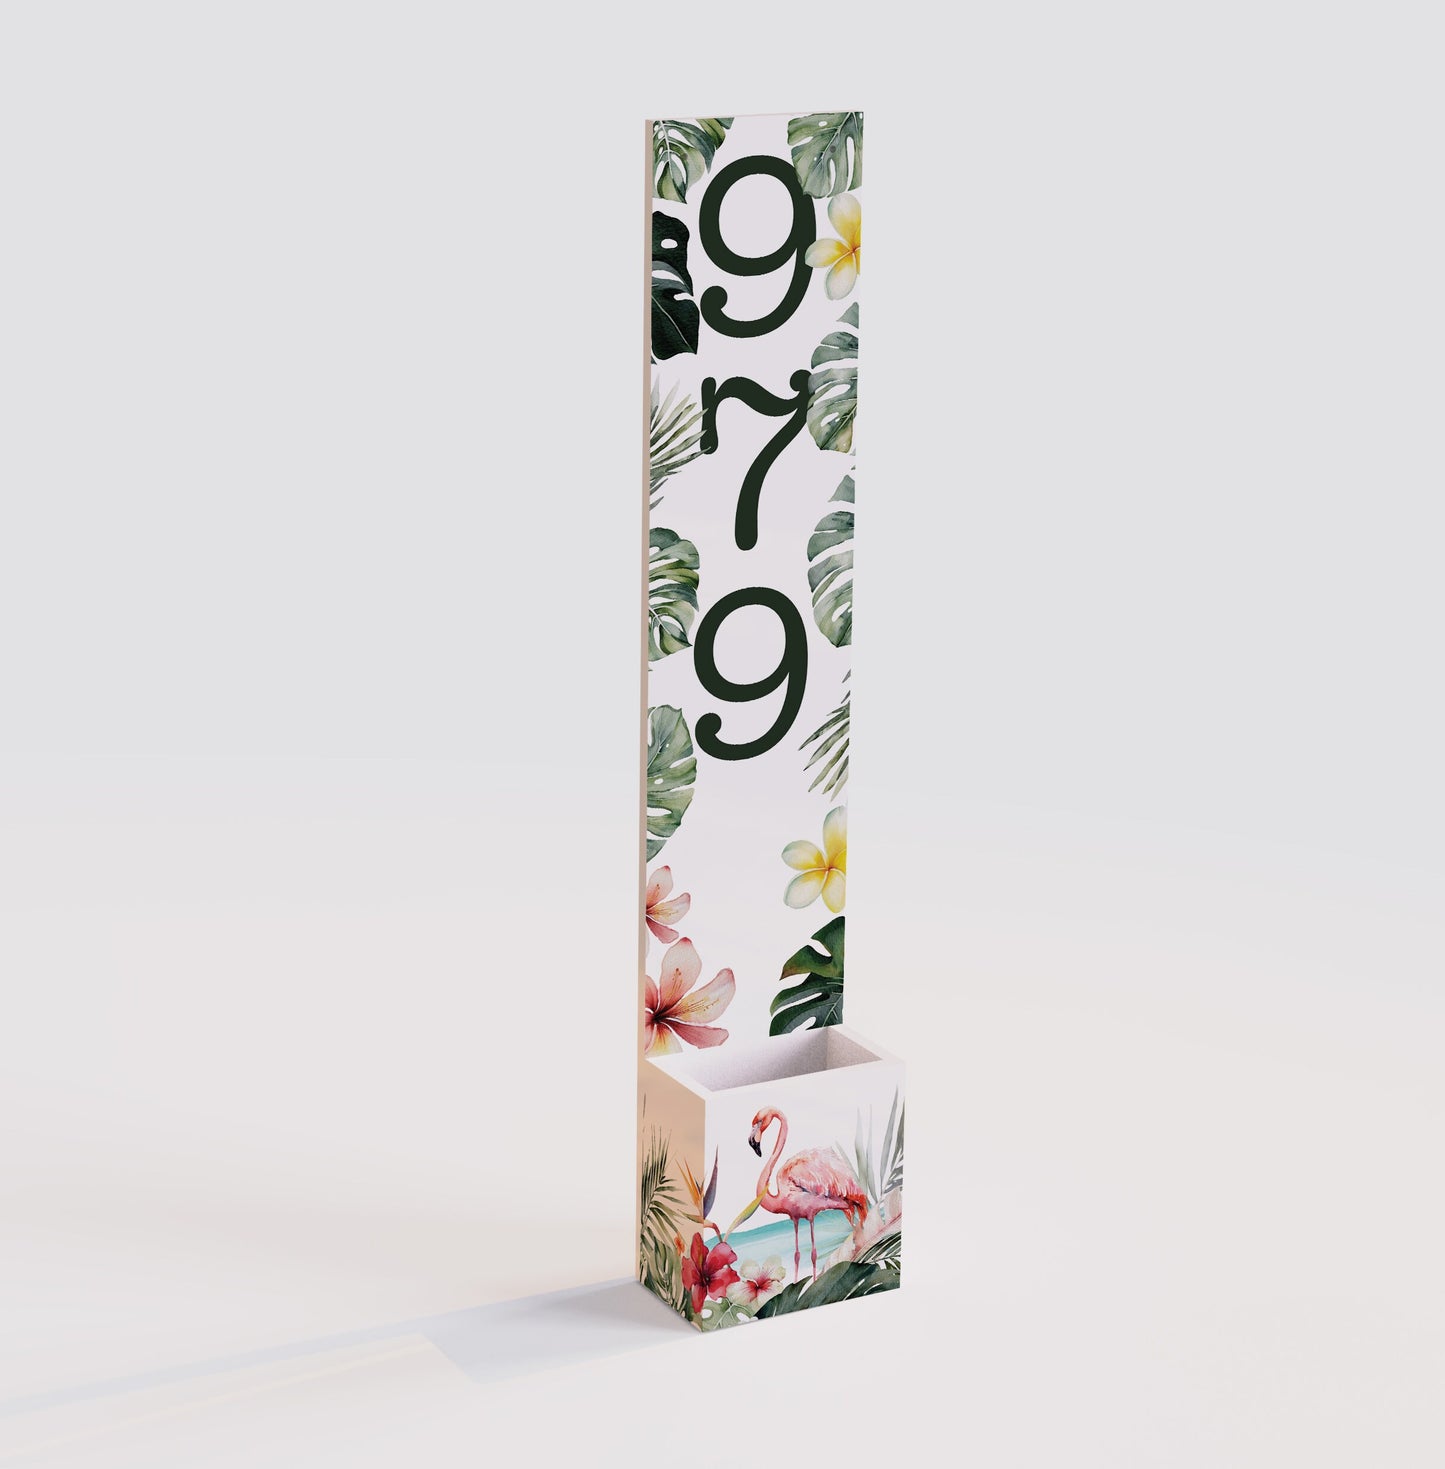 Summer Style Wooden Address Number Planter Sign with Flamingo Pattern - 36"x4.375"x7" - Perfect for Front Door Display